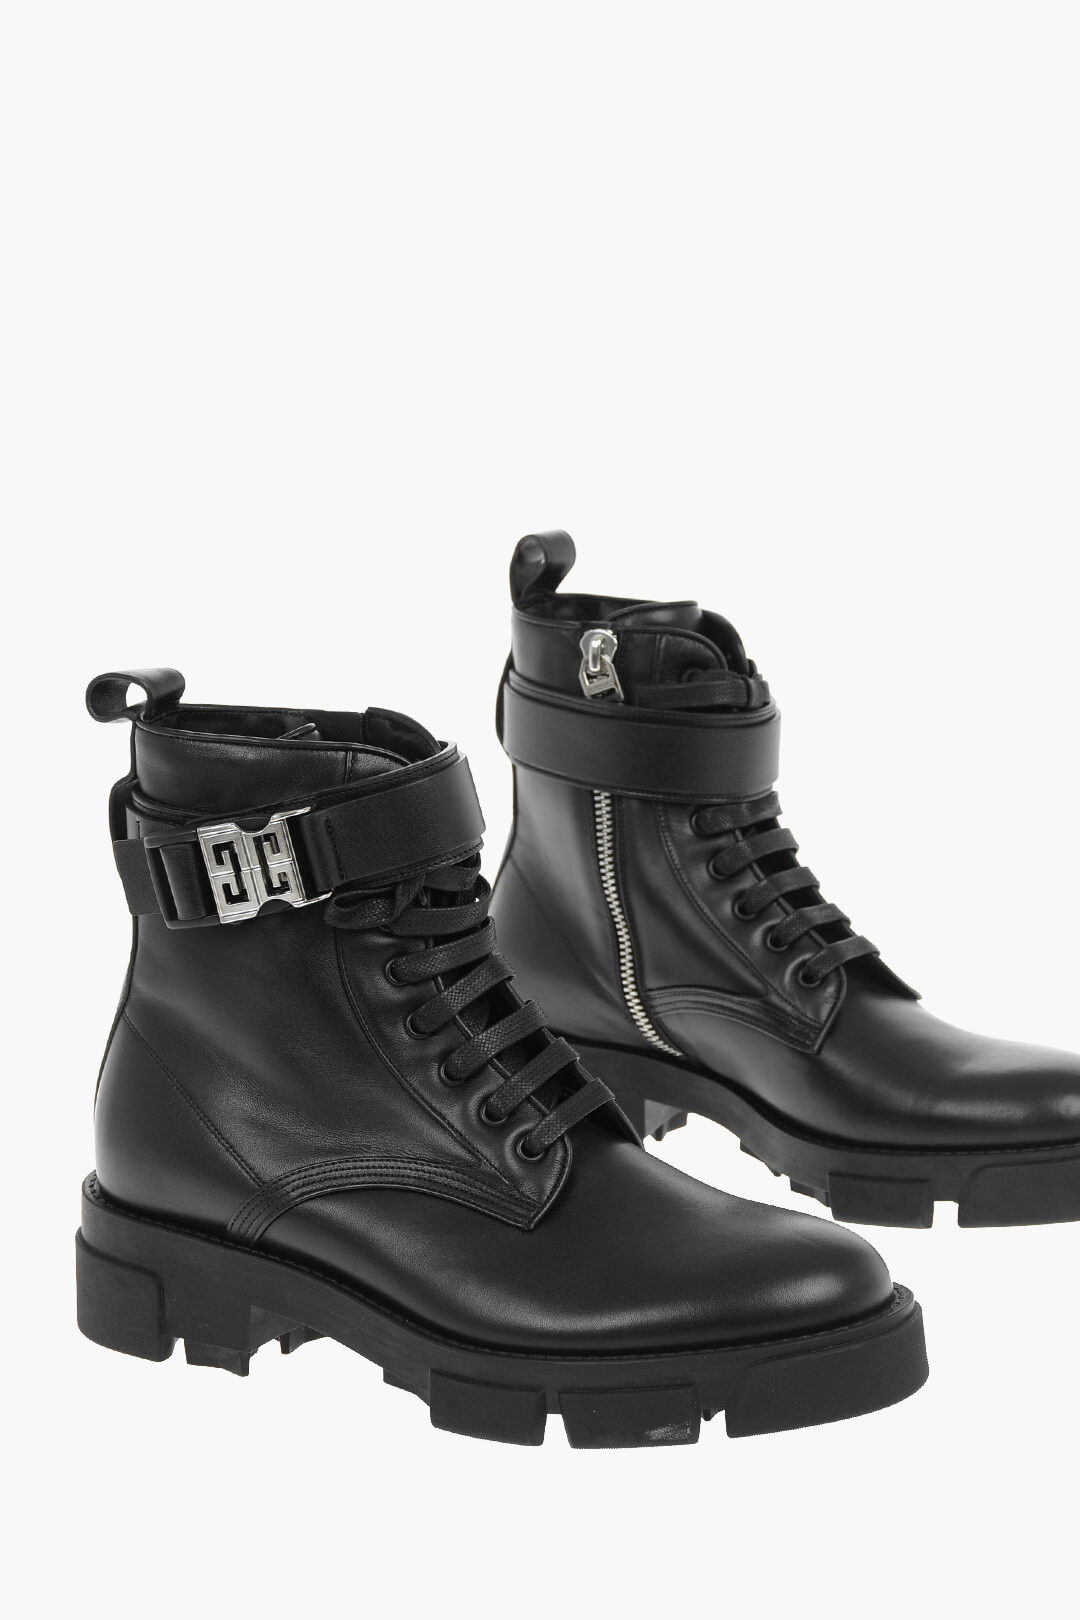 Givenchy Calfskin TERRA Ankle Boots with Logoed Buckle 5cm men - Glamood  Outlet